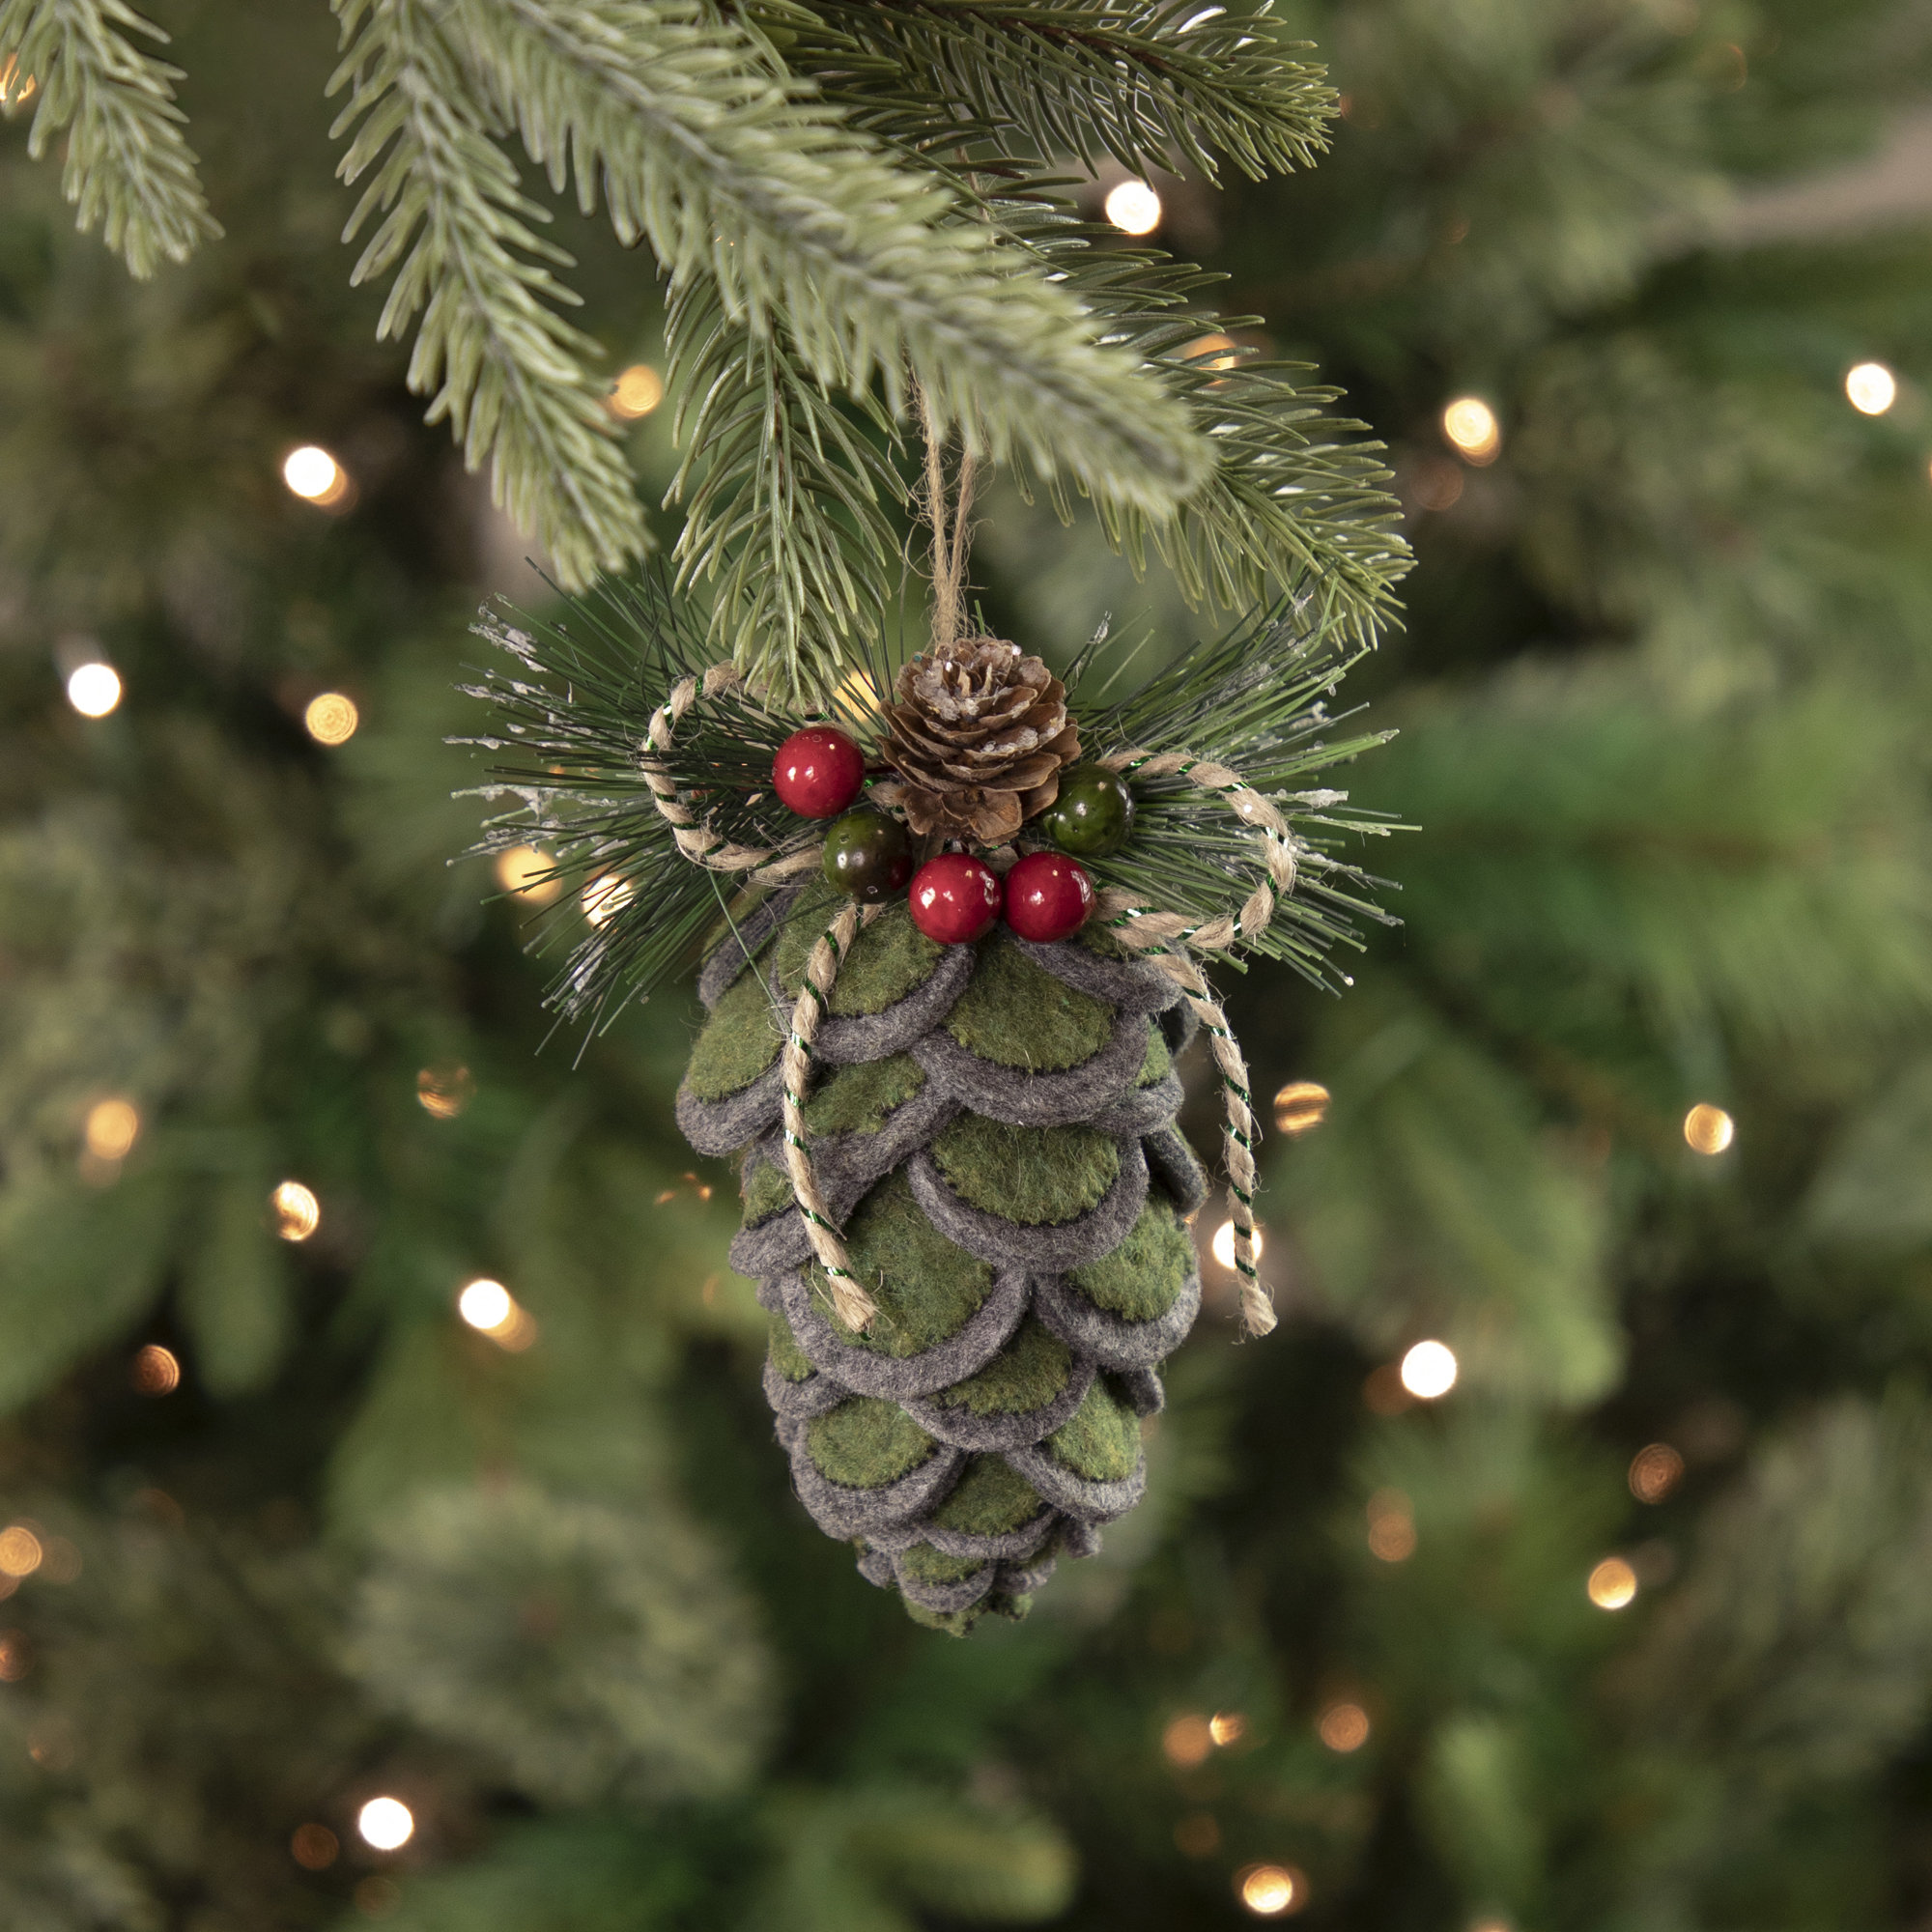 Northlight 6 Green Felt Pine Cone with Berries Christmas Ornament